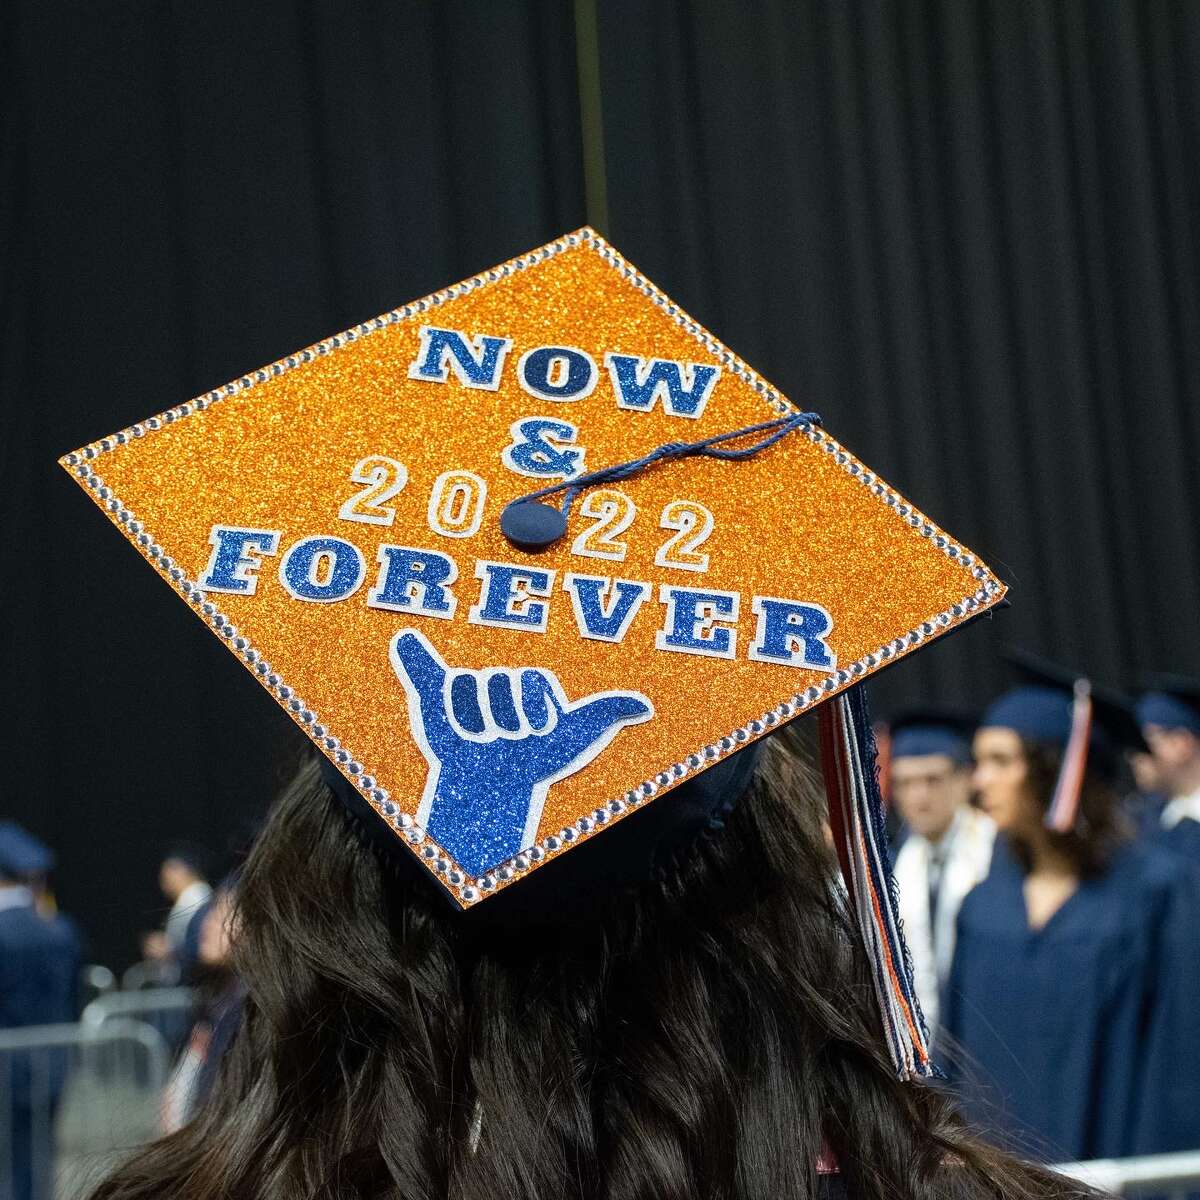 Nearly 3,000 UTSA students graduated in the December commencement ceremonies on Tuesday, December 13, at the Alamodome in San Antonio.